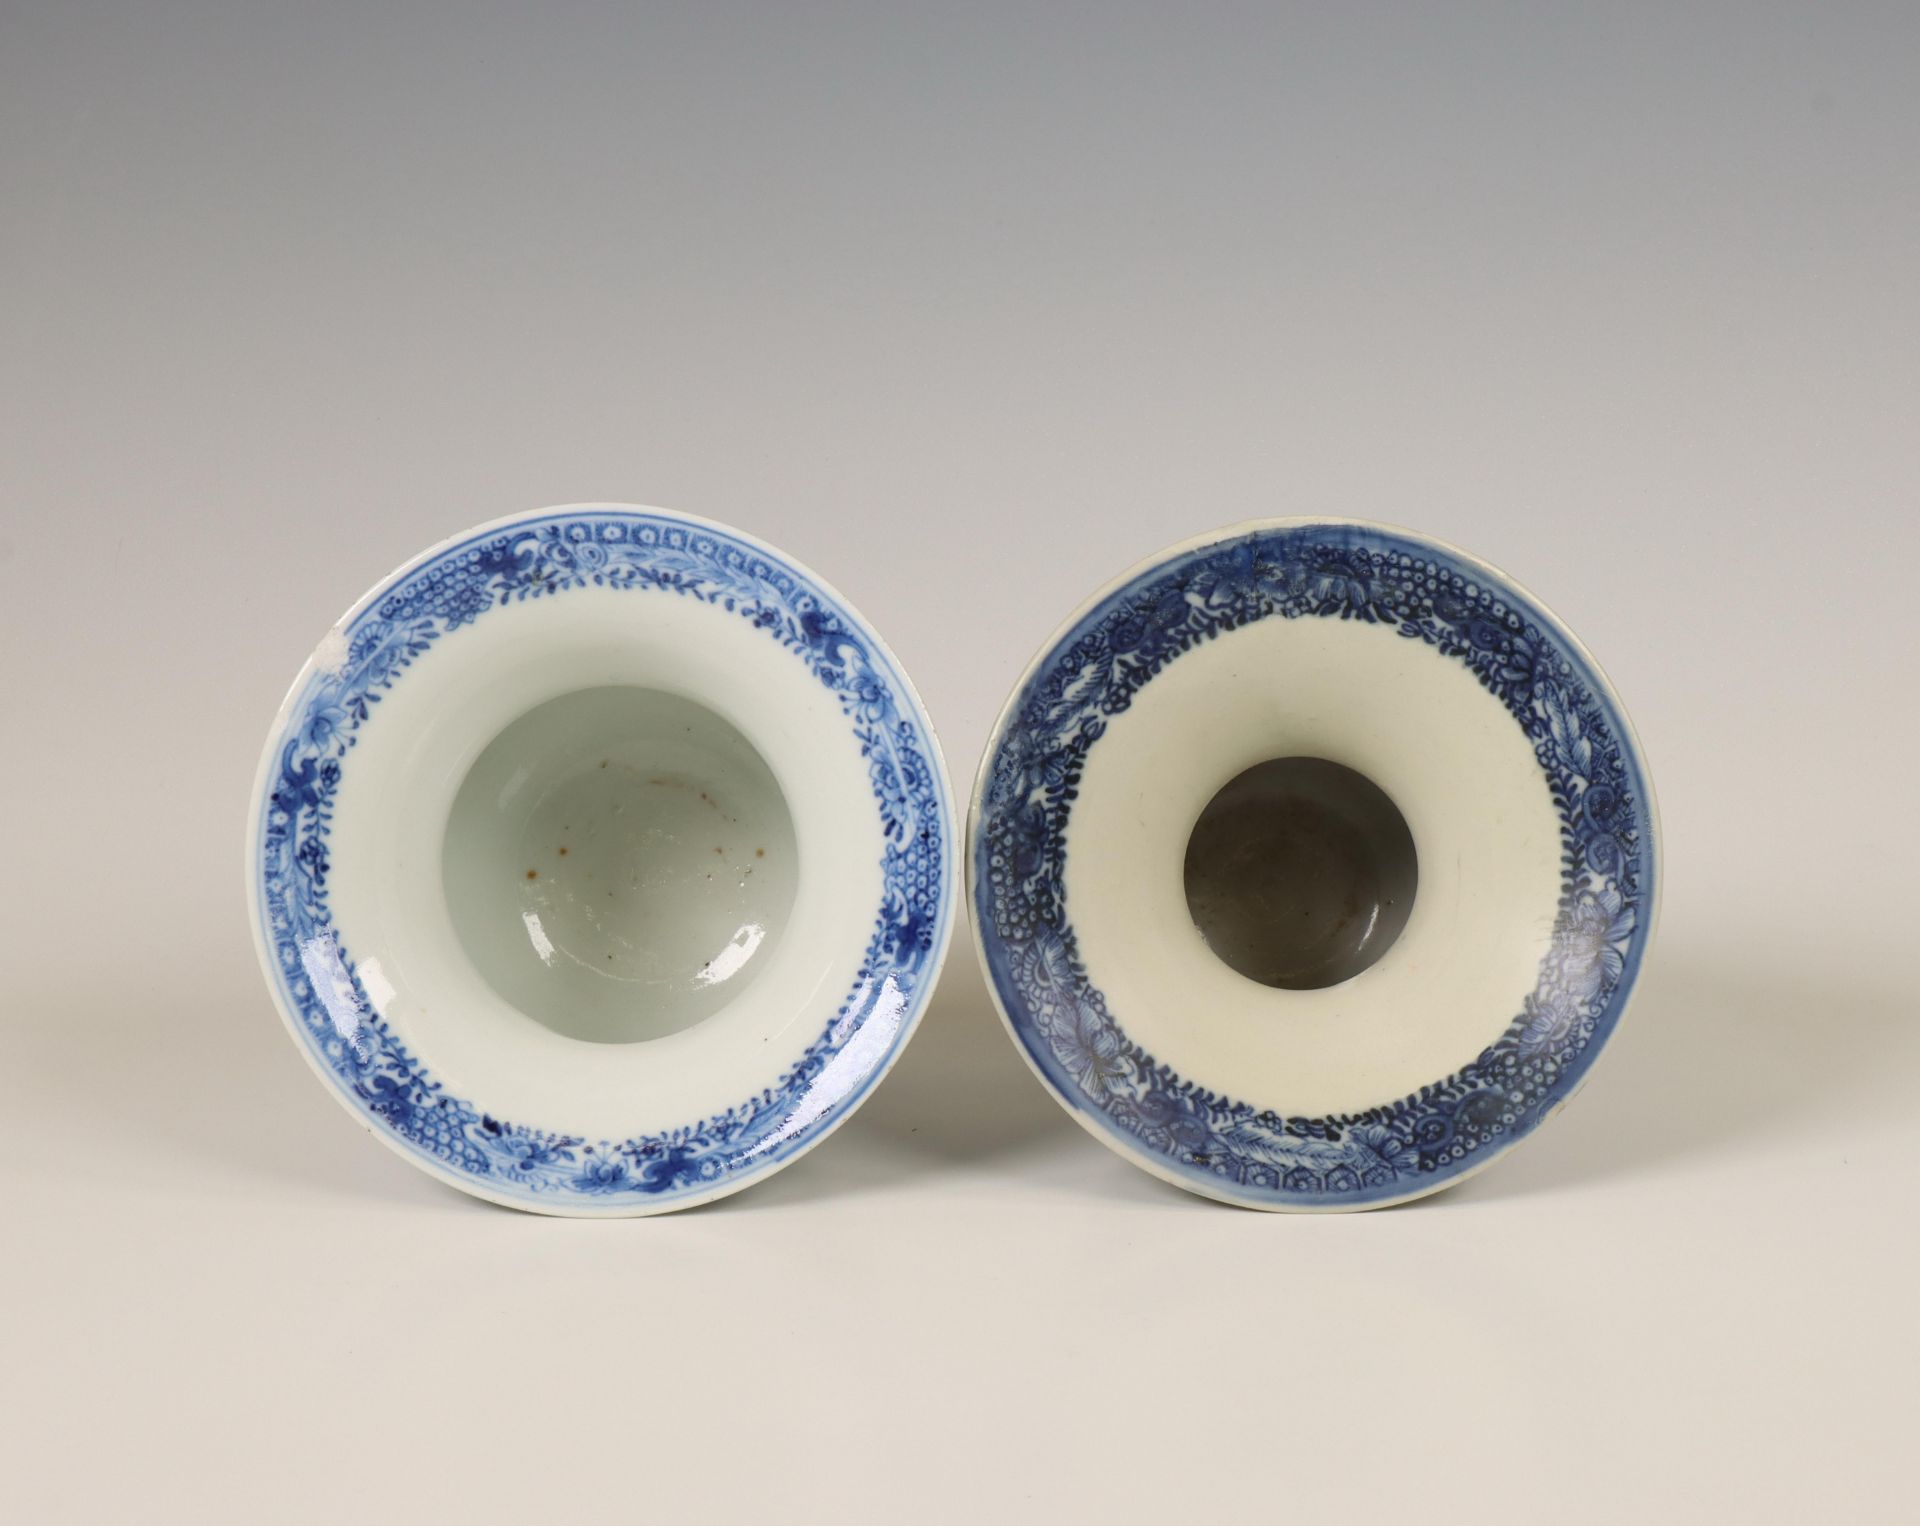 China, two blue and white porcelain spittoons, Qianlong period (1736-1795), - Image 2 of 2